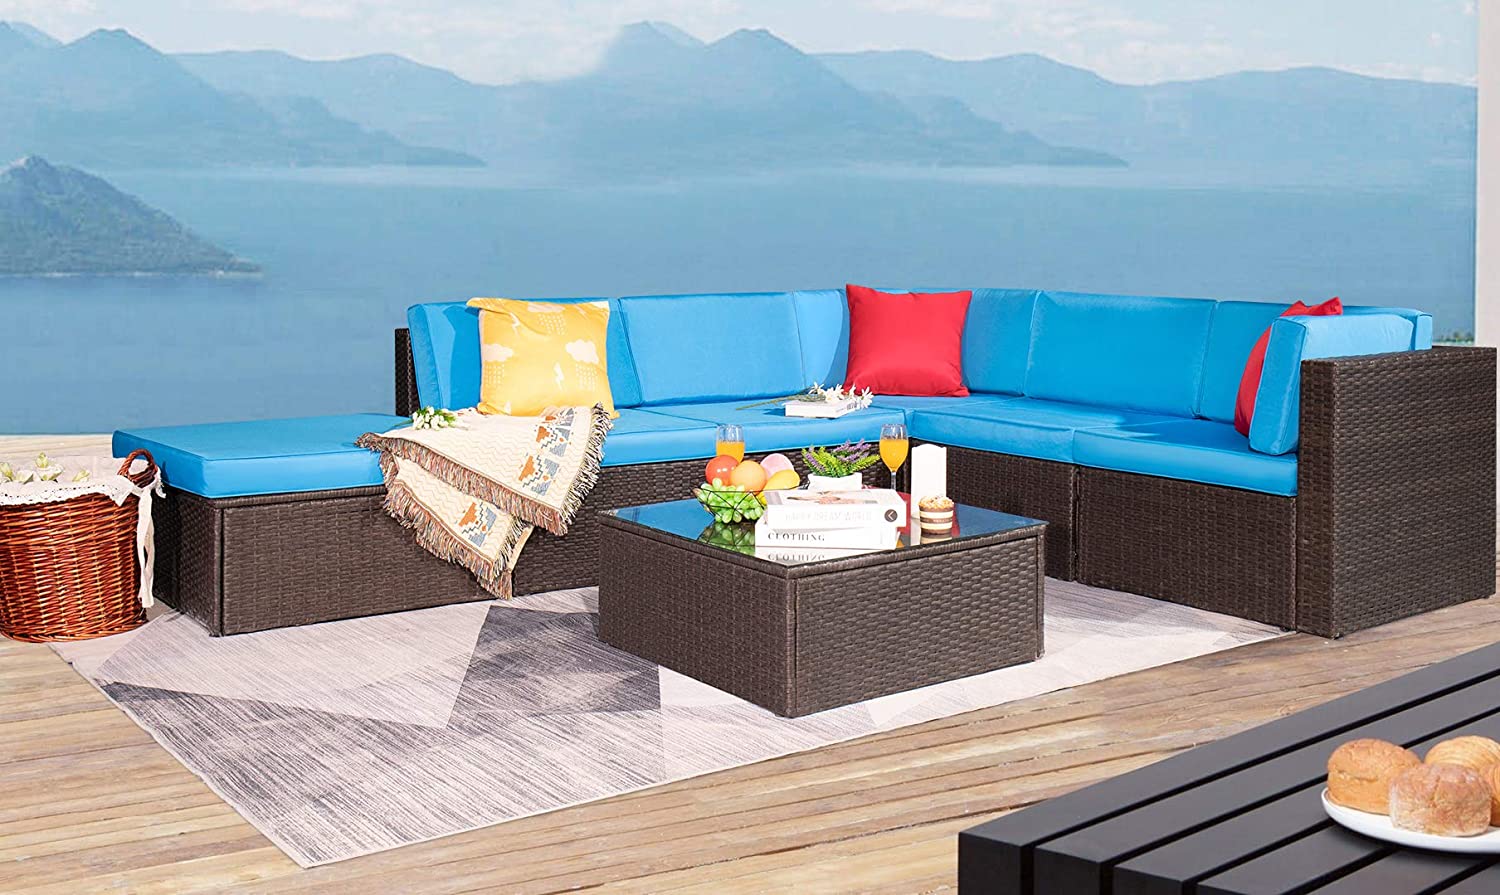 Lacoo 7 Pieces Outdoor Conversation Set All Weather PE Rattan Sectional Sofa Sets with Soft Cushions, Ottoman and Coffee Table, Blue - image 1 of 7